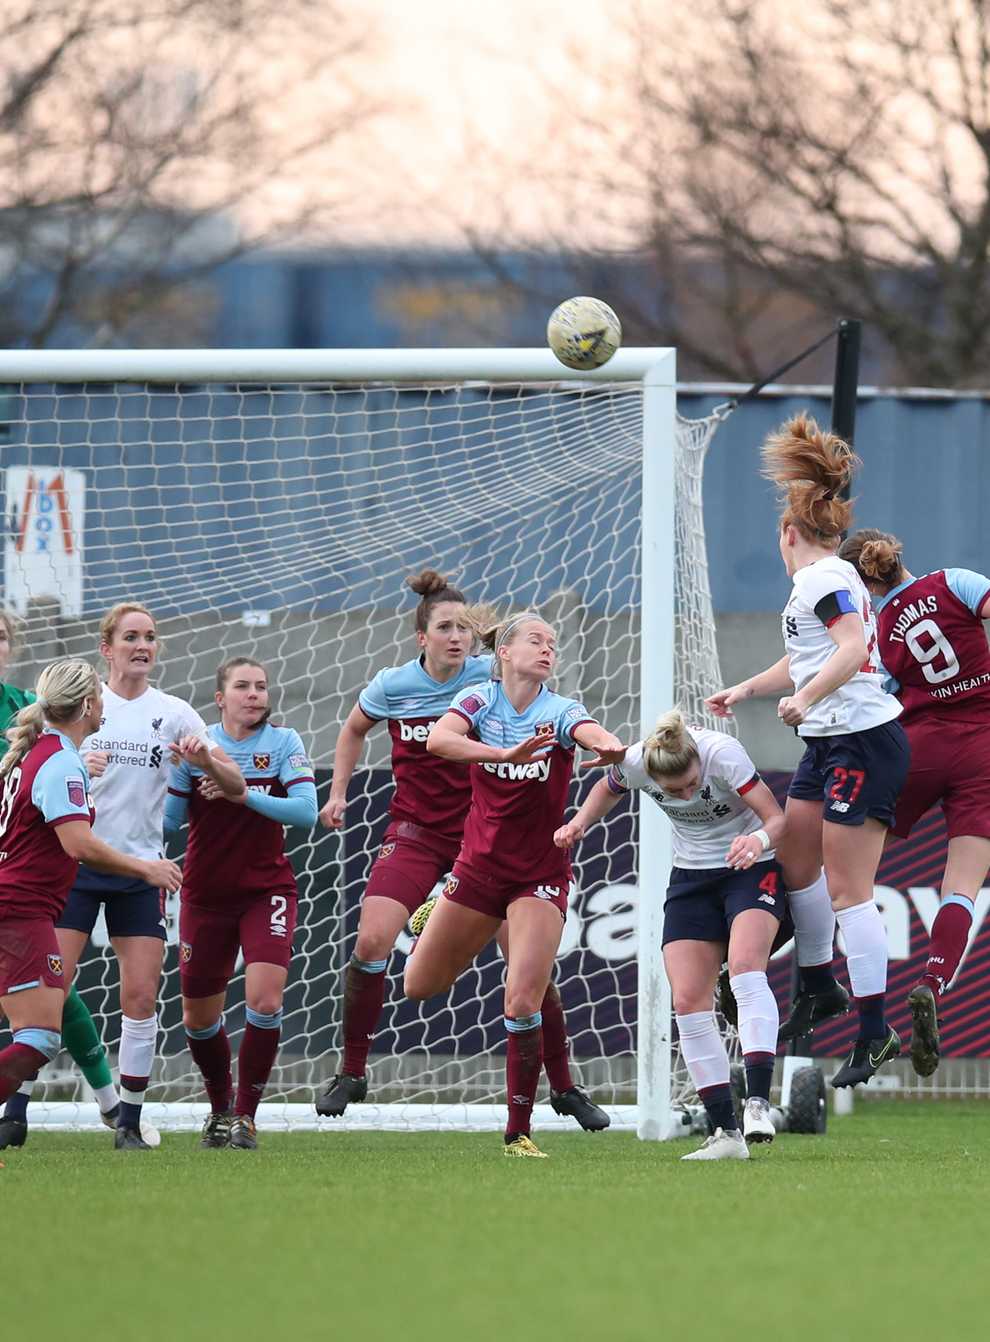 The latest round of Covid-19 tests in the WSL and Championship produced no positive results